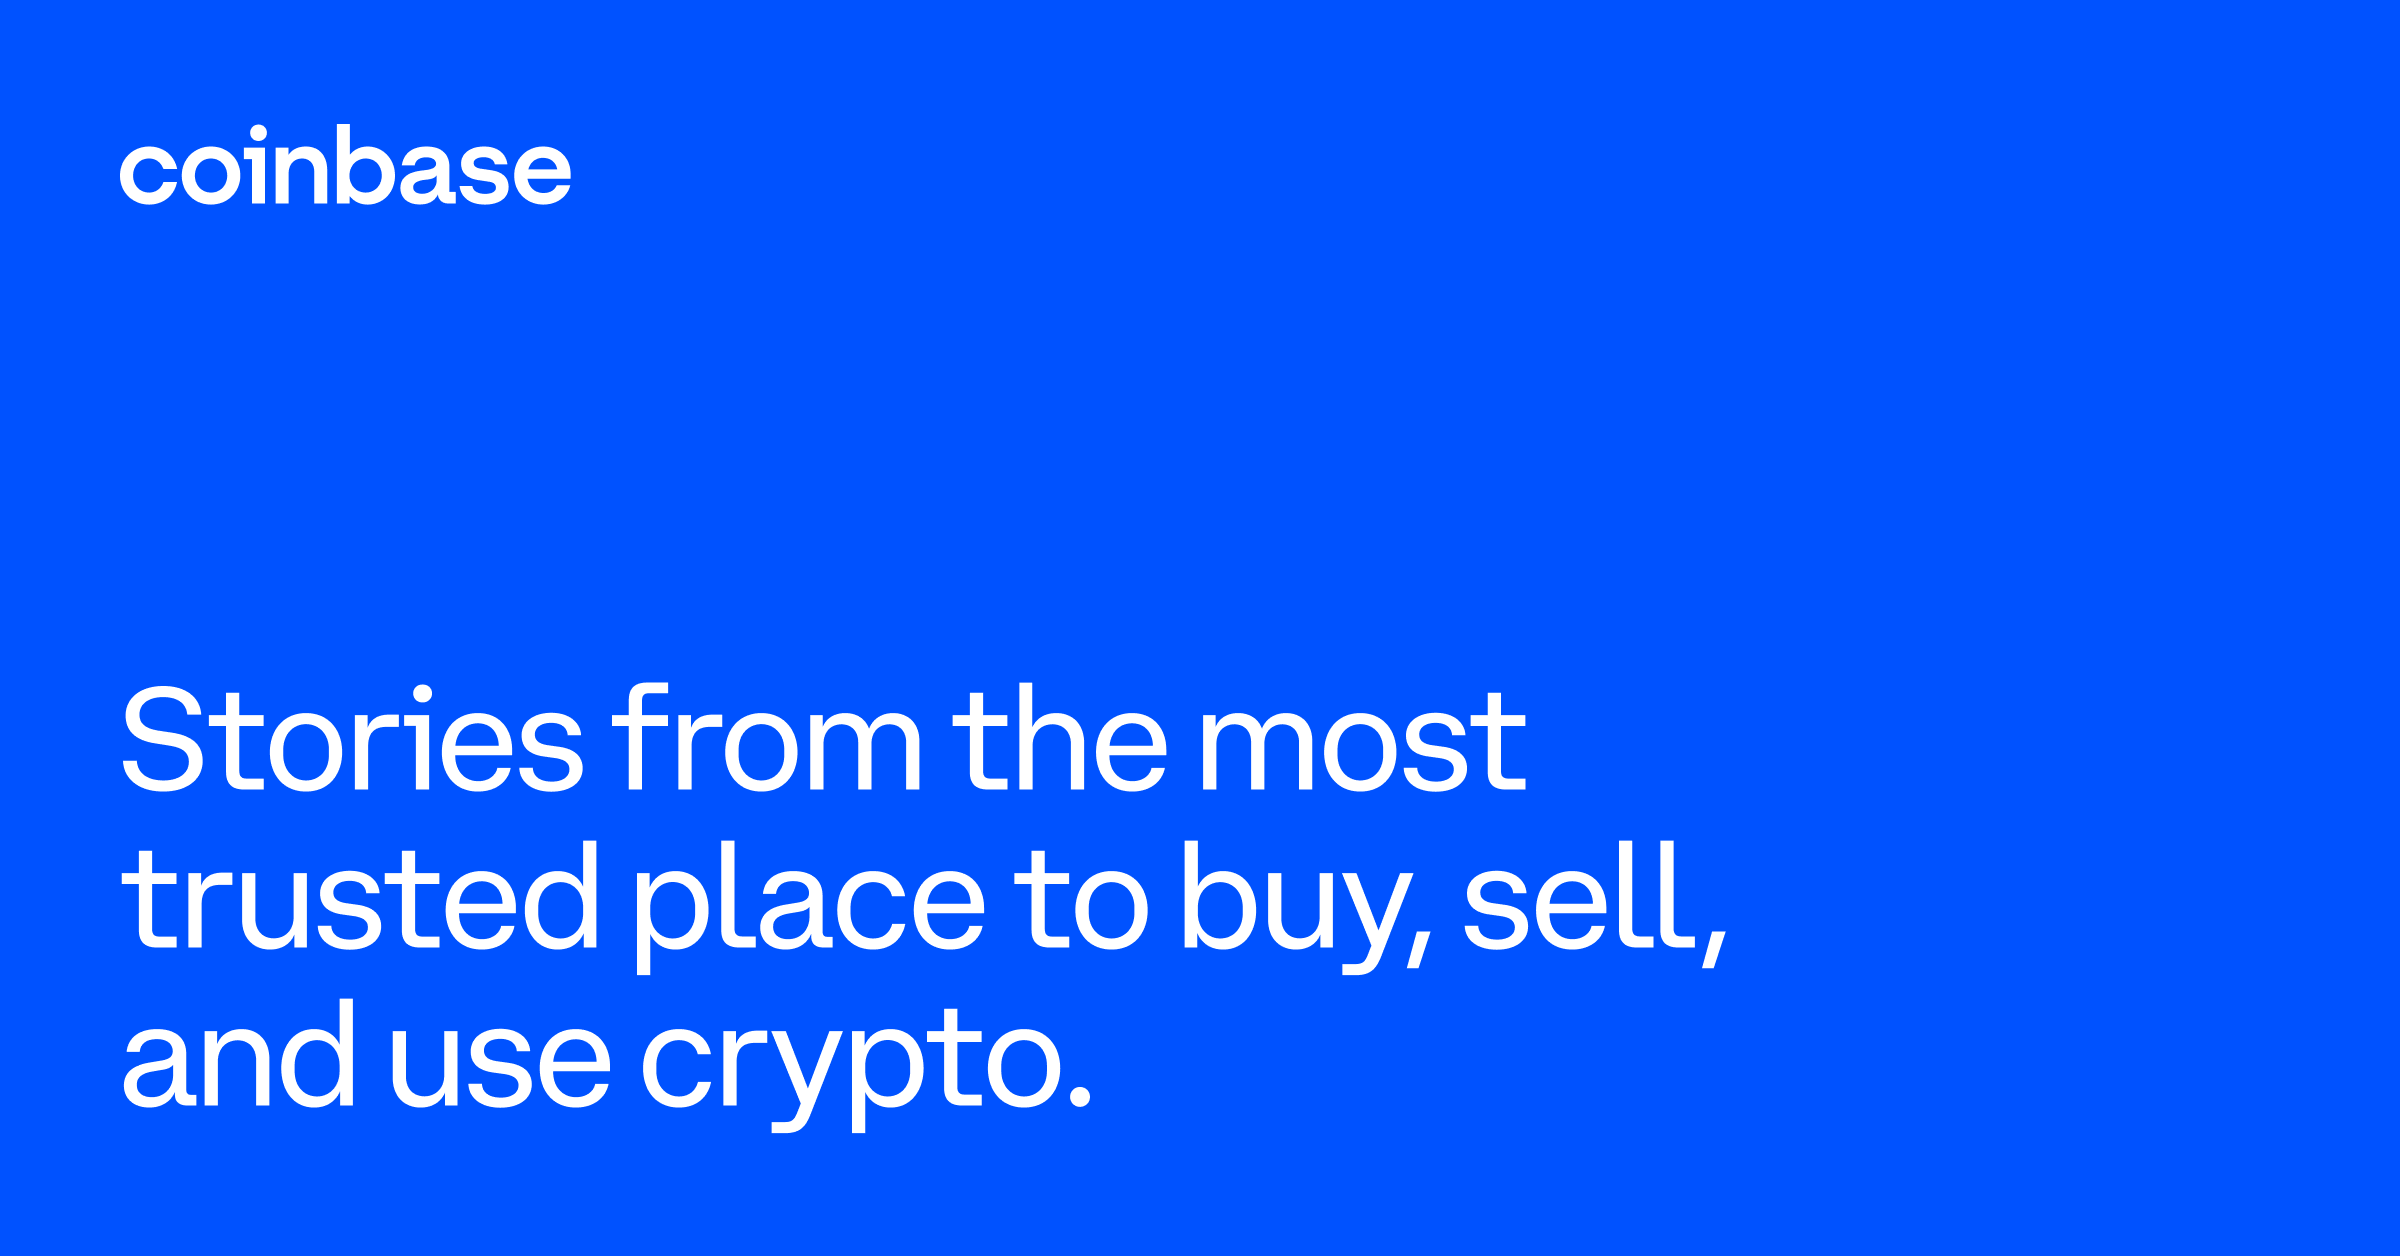 Thumbnail of Coinbase is a mission focused company